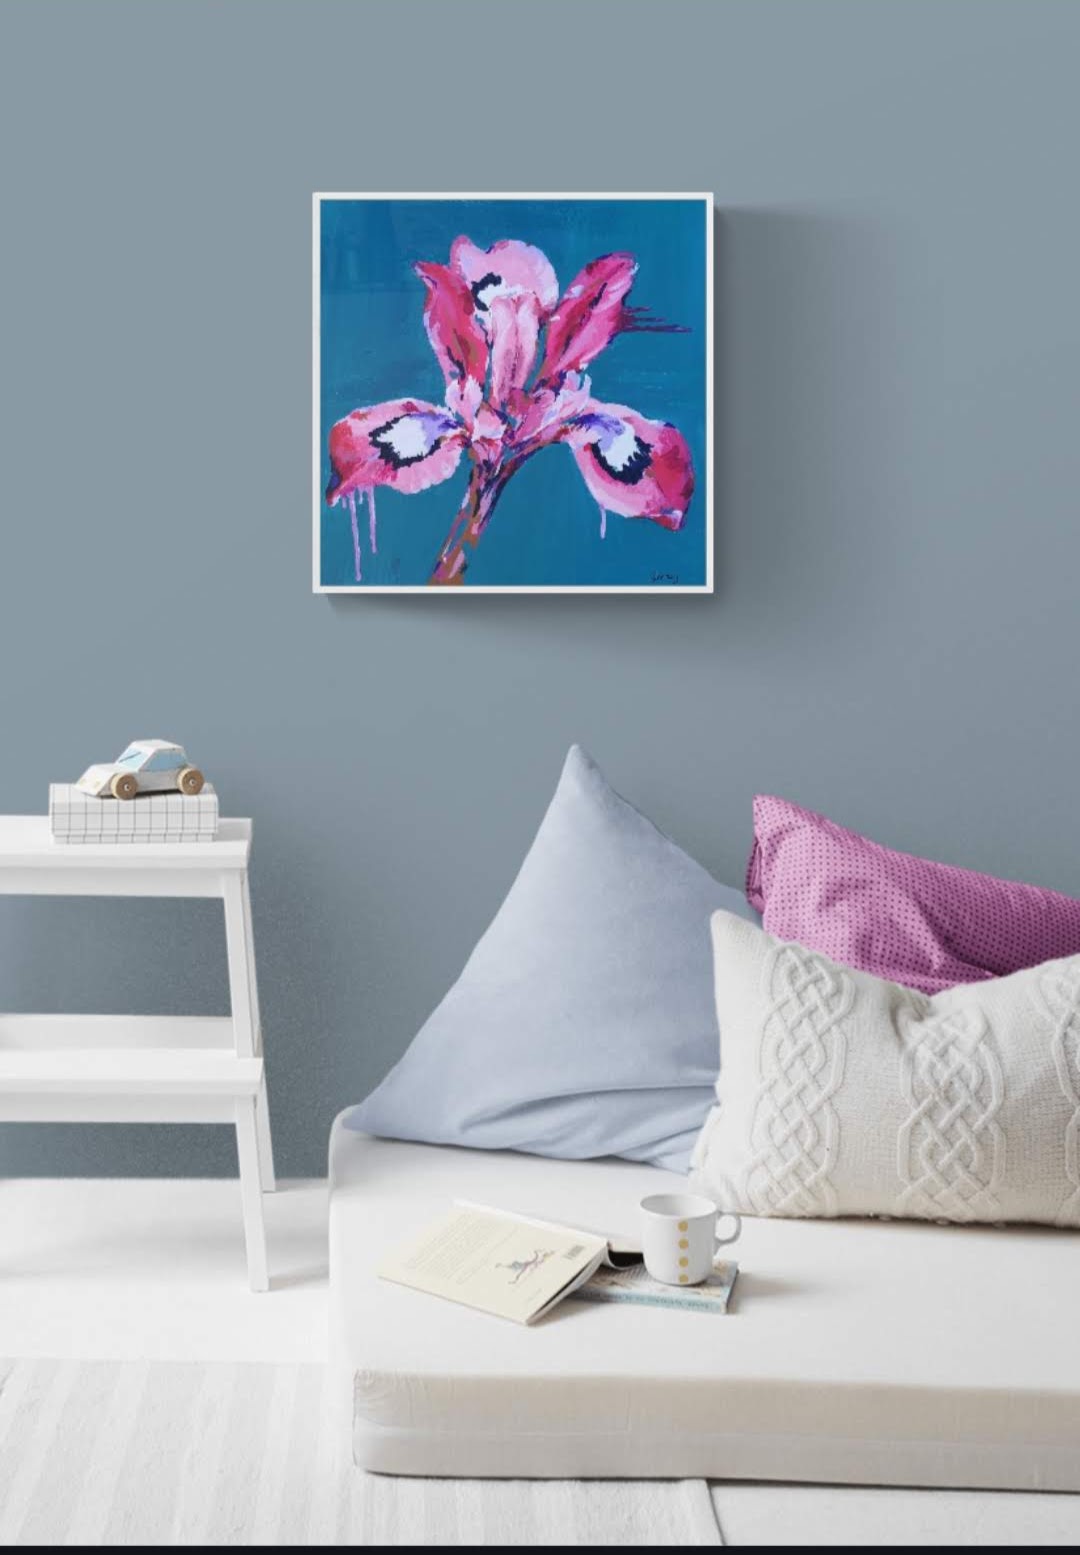 Bright Colourful Modern Iris flower canvas painting by Judy Century. Teal background with pink, white, purple and navy Lily. Original Art hanging in kids bedroom interior for home decor inspiration